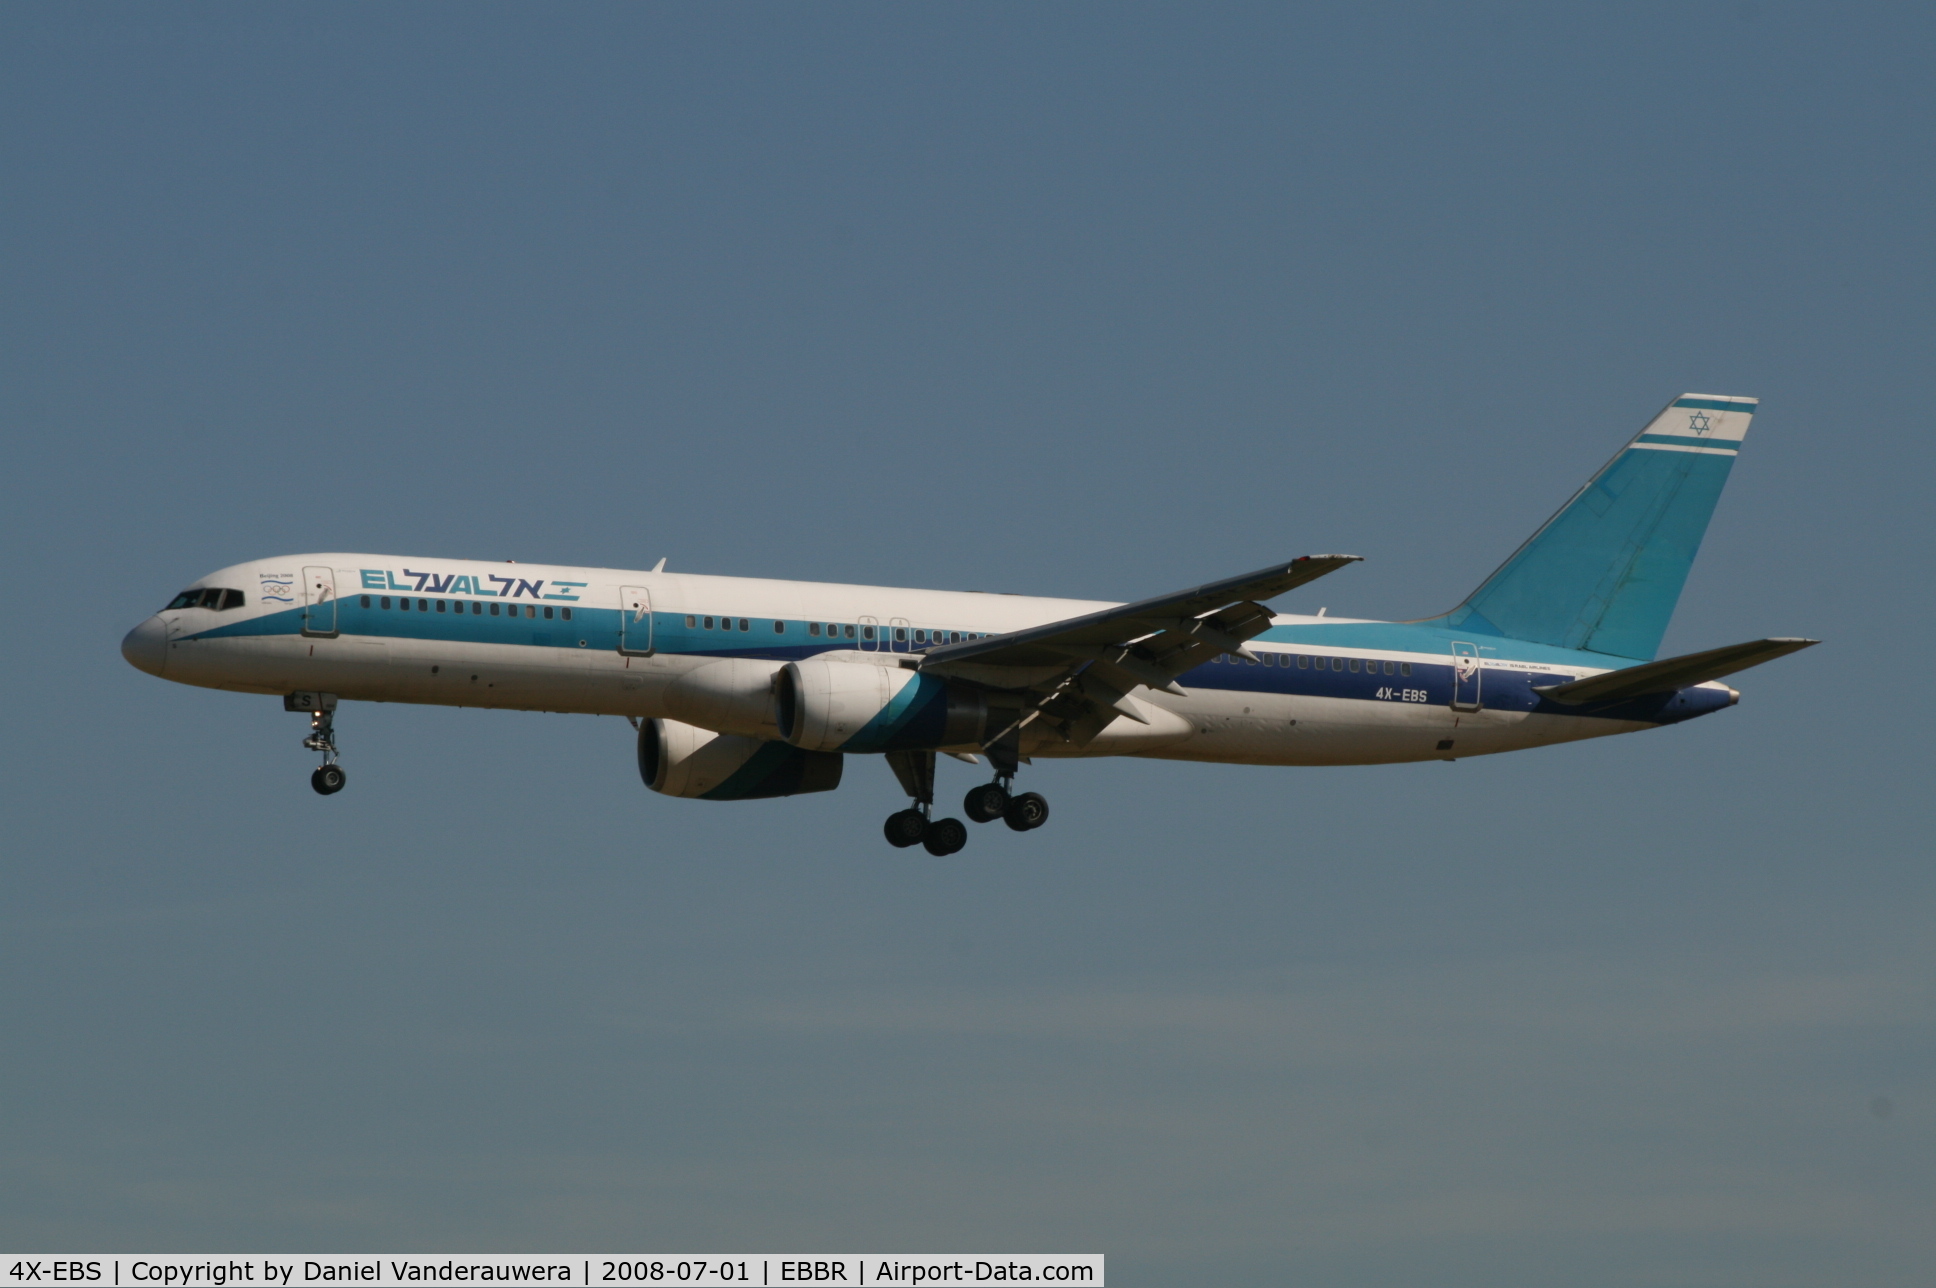 4X-EBS, 1990 Boeing 757-258 C/N 24884, arrival of flight LY331 to rwy 25L